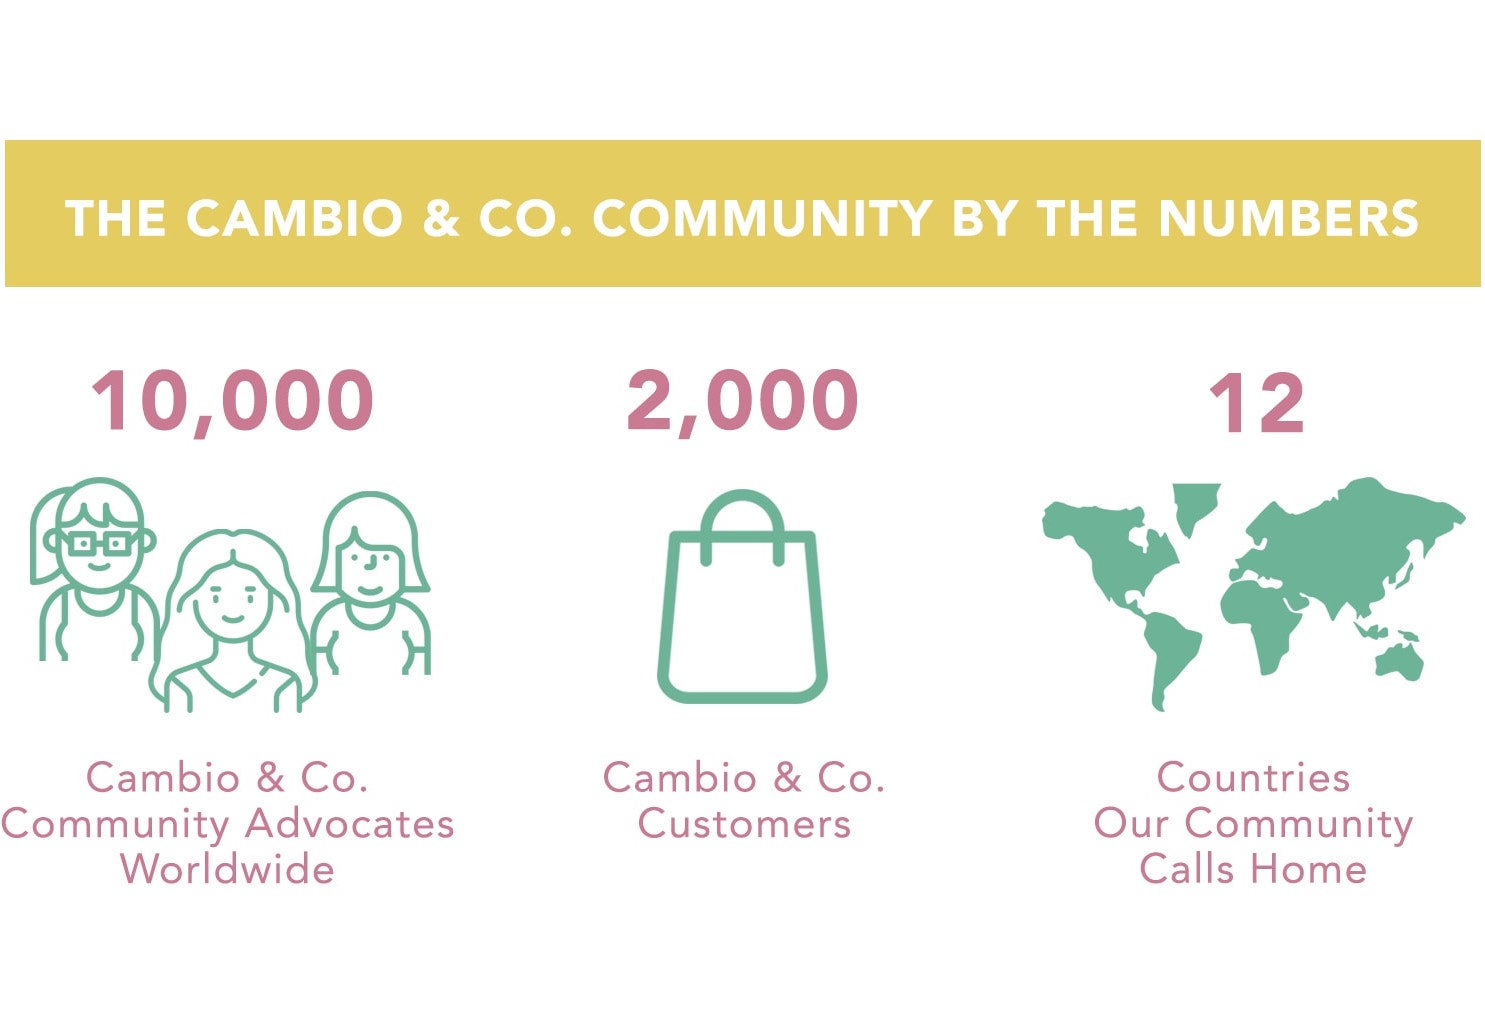 Infographic of the Cambio & Co. community by the numbers: 10000 Cambio community advocates around the world, 2000 customers worldwide, and 12 countries our customers call home.